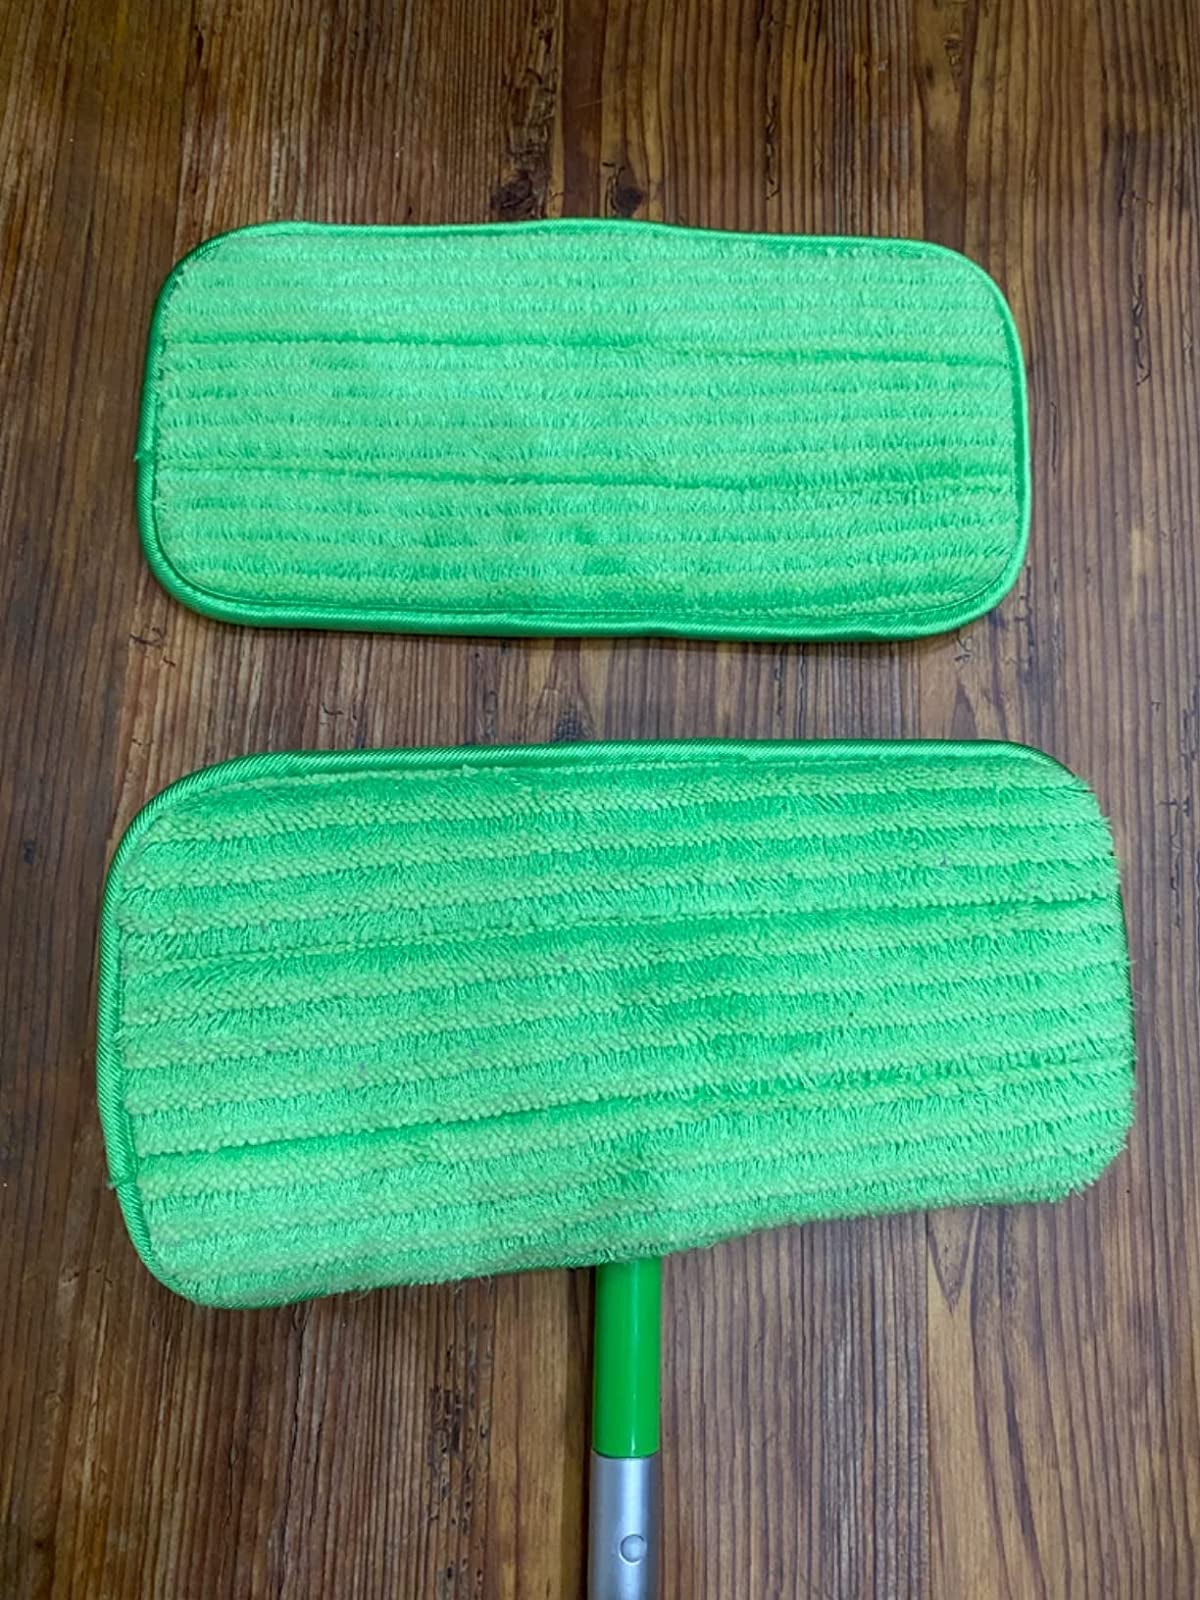 Series 9: Old Towel New - Mop Pad - Michele Made Me